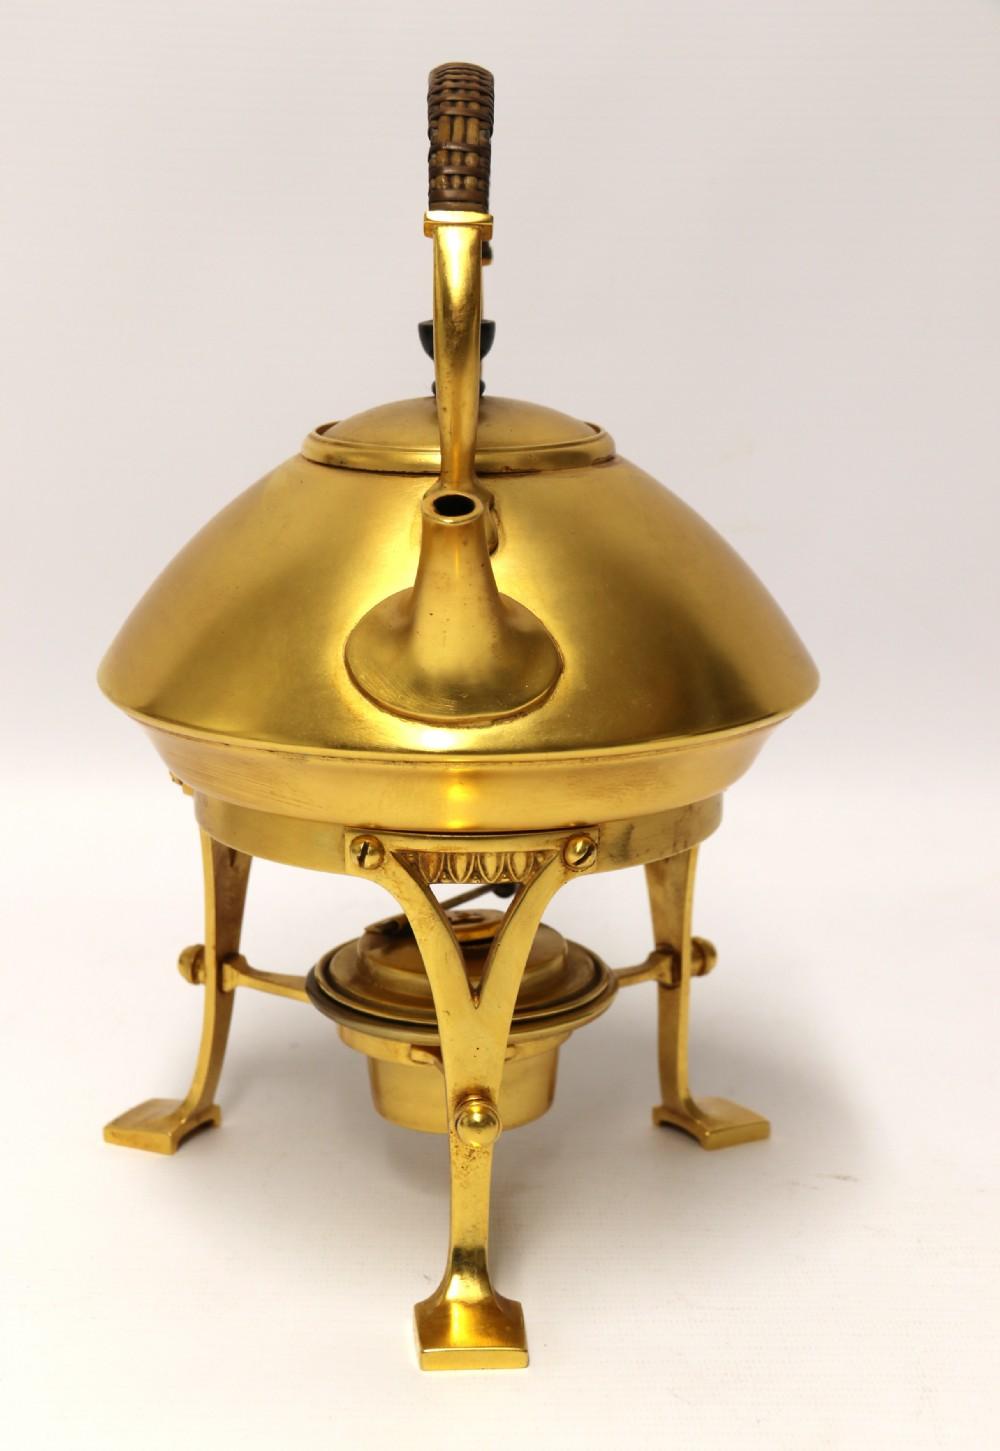 A late 19th century Aesthetic movement Spirit Kettle.
This opulent and beautifully made piece is made from brass with gold plated surfaces which is in excellent condition. It is of a wonderful design, very reminiscent of a piece of Christopher